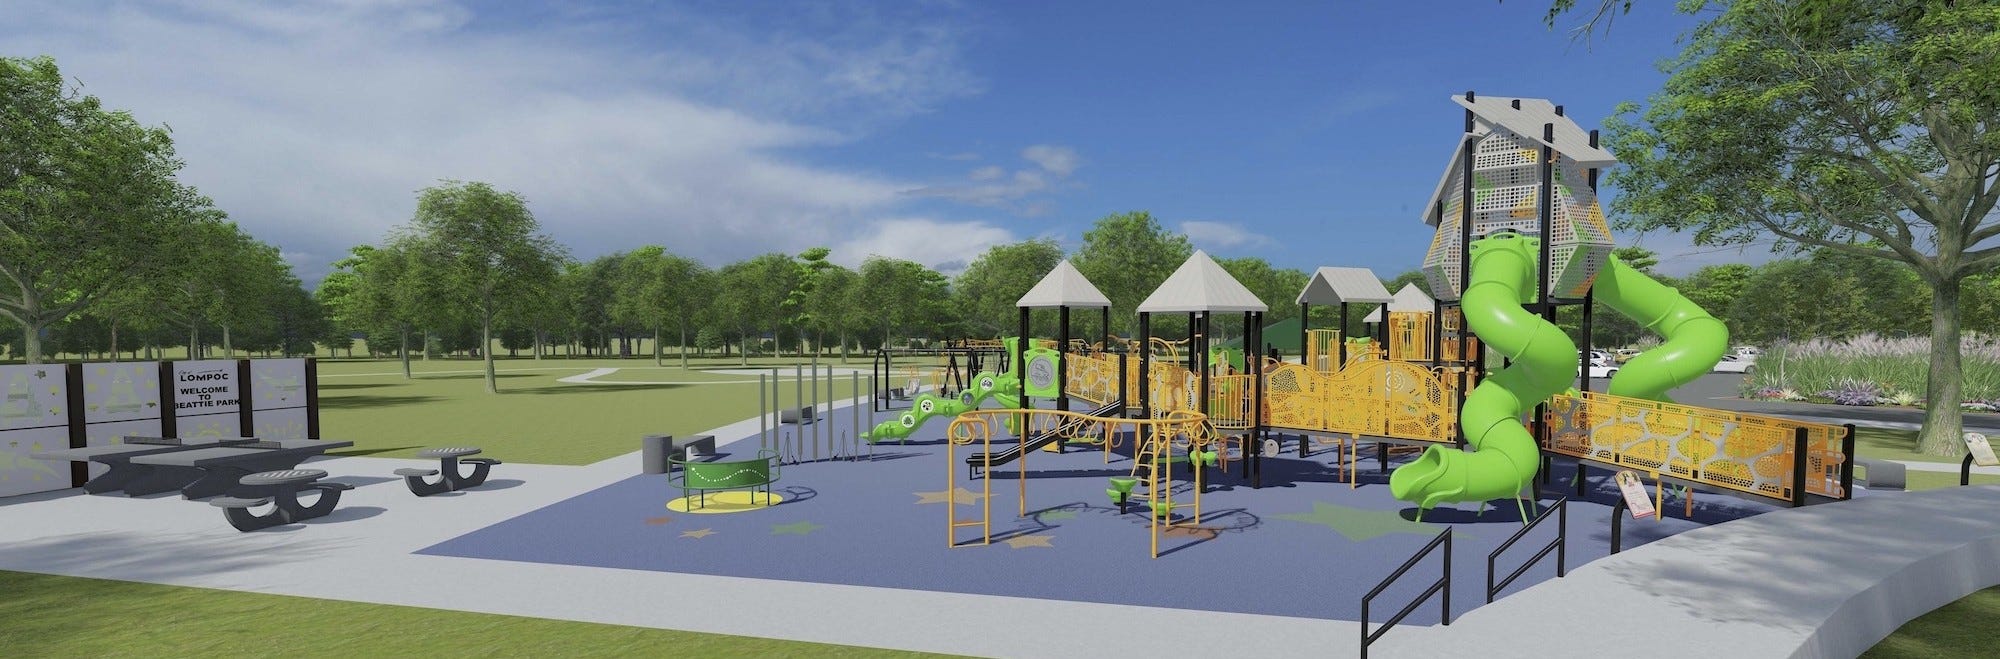 Prop 68 Funds Inclusive Play and Outdoor Fitness in Lompoc, California